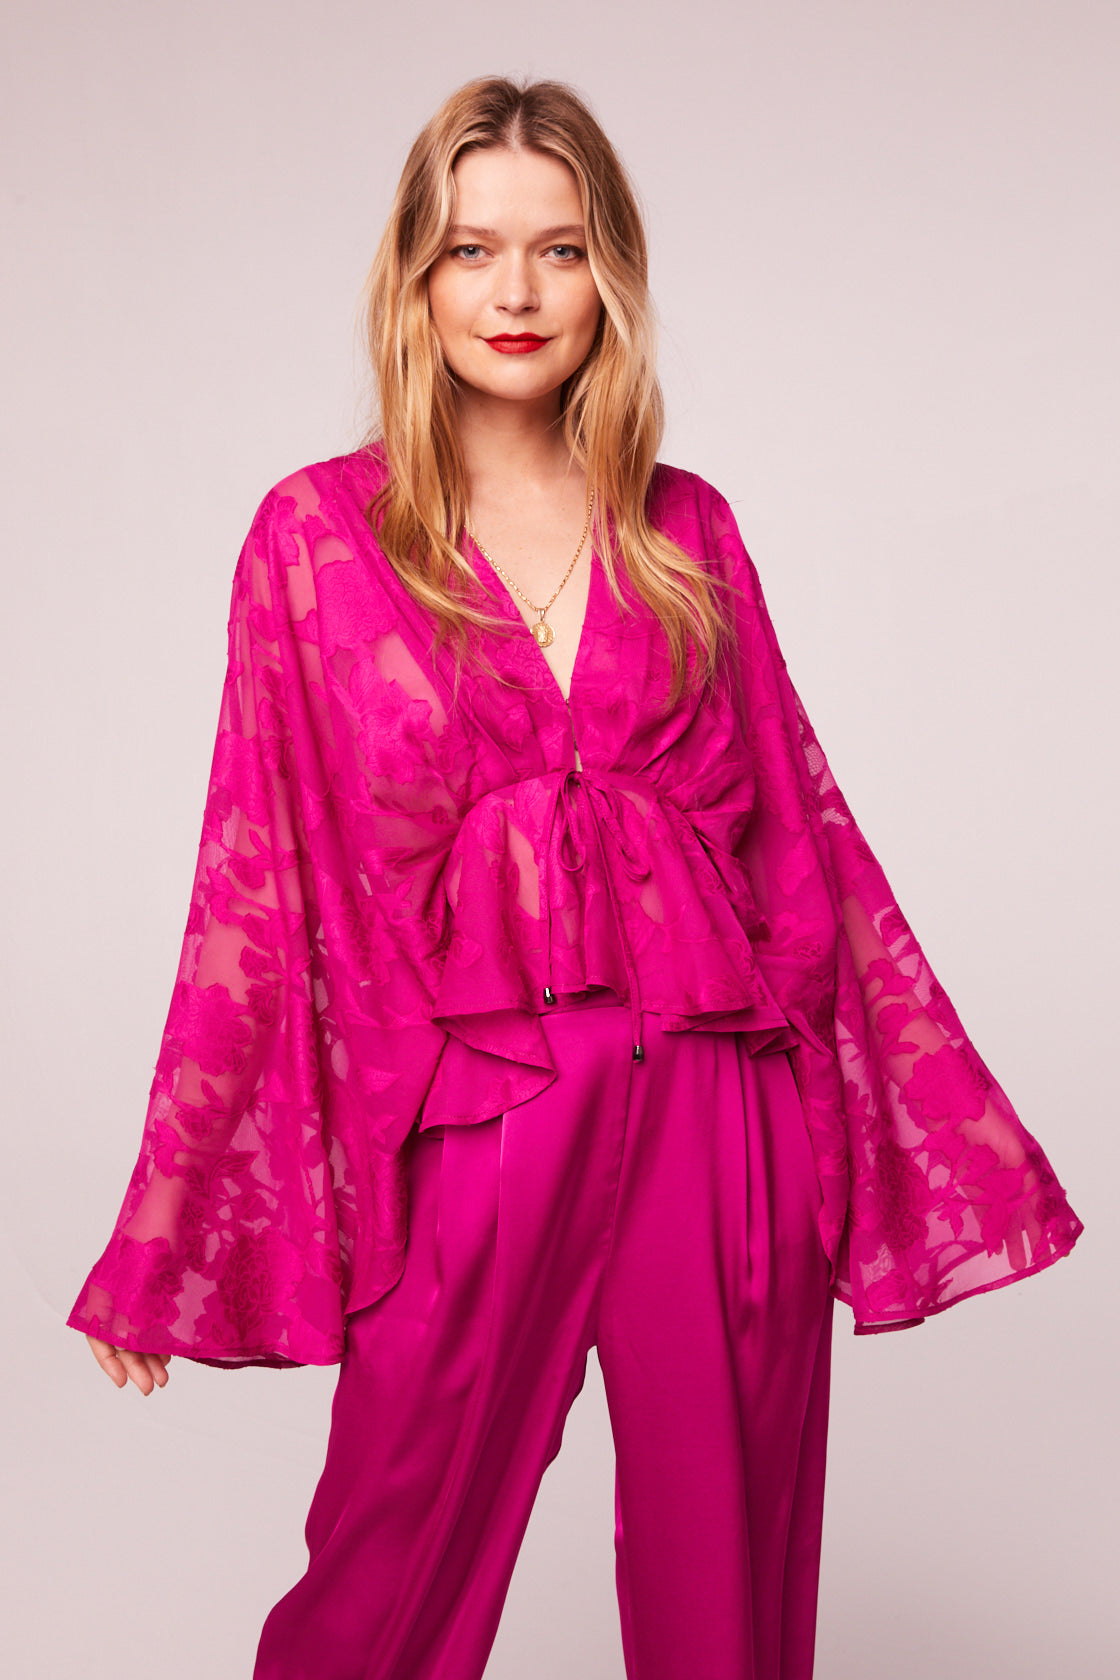 Fuchsia Pantsuit with Floral Blouse